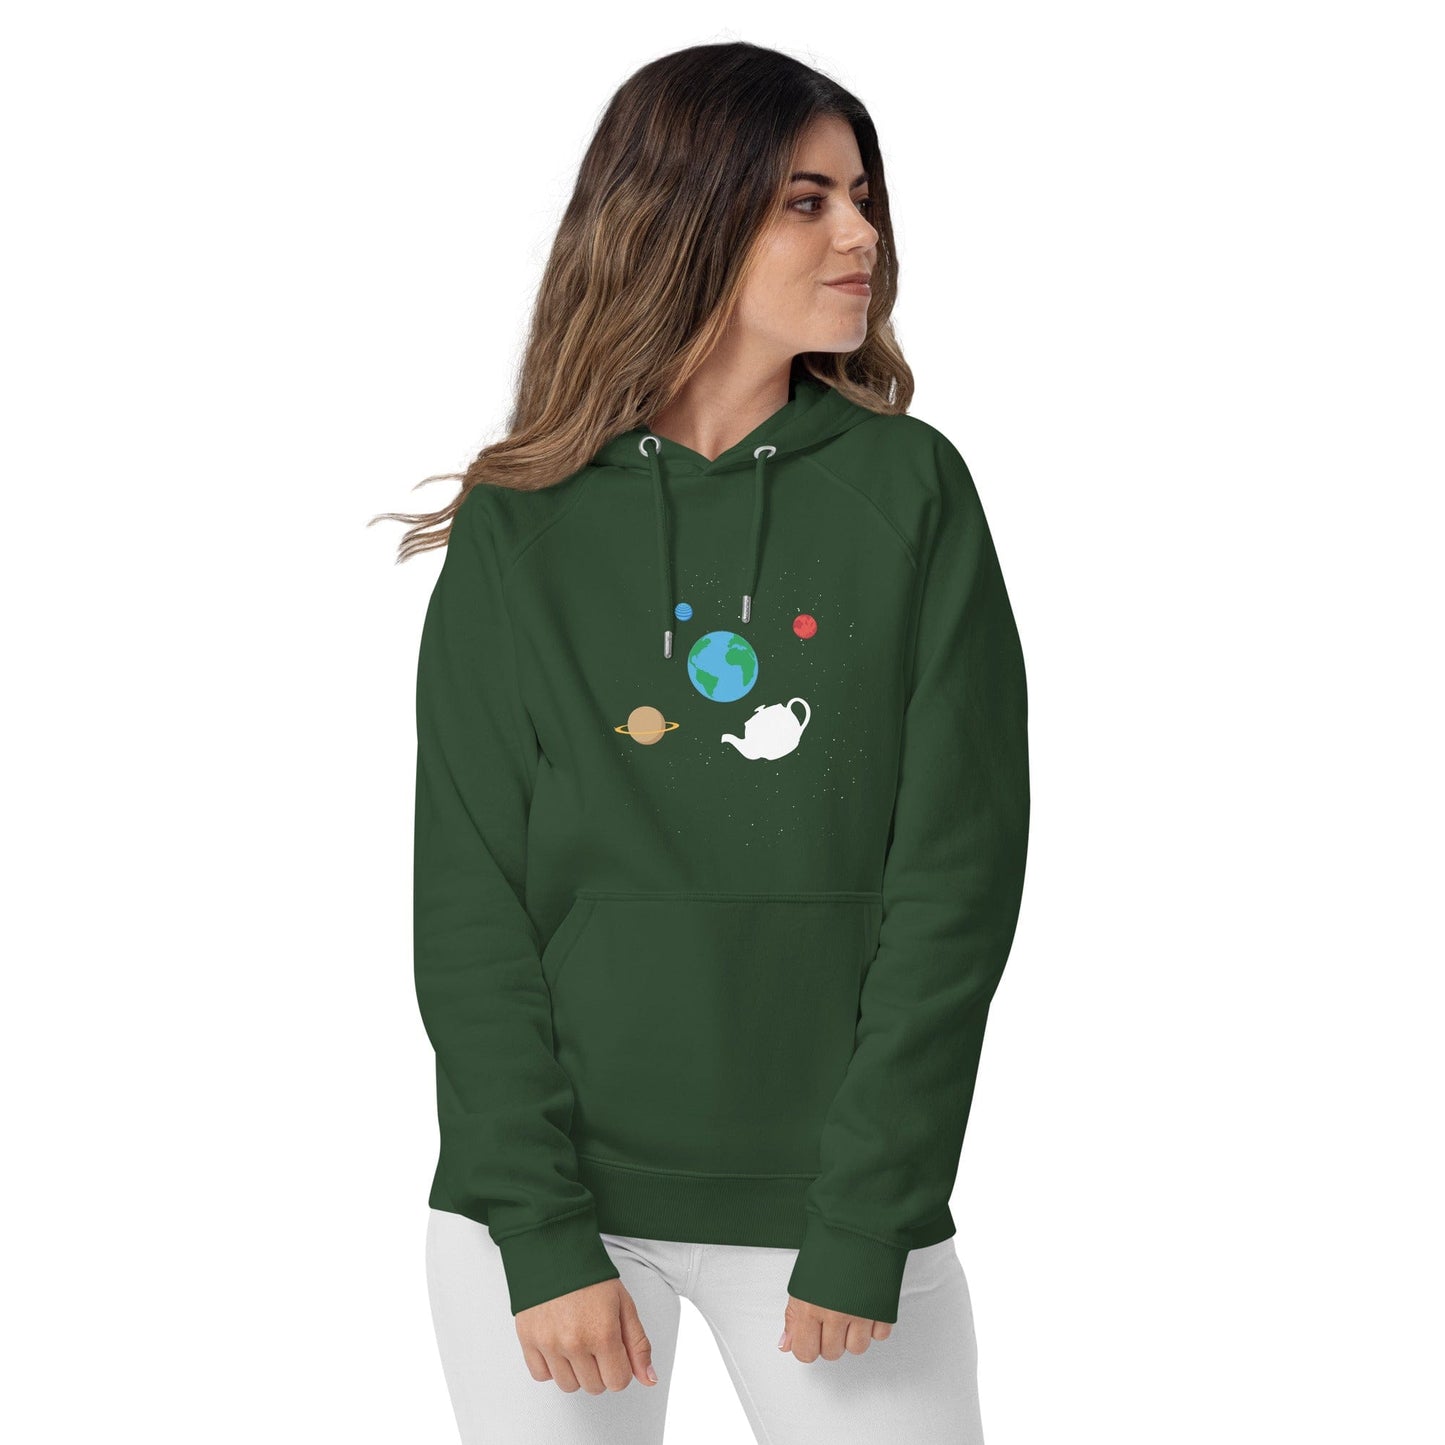 Russell's Teapot Floating in Space - Eco Hoodie